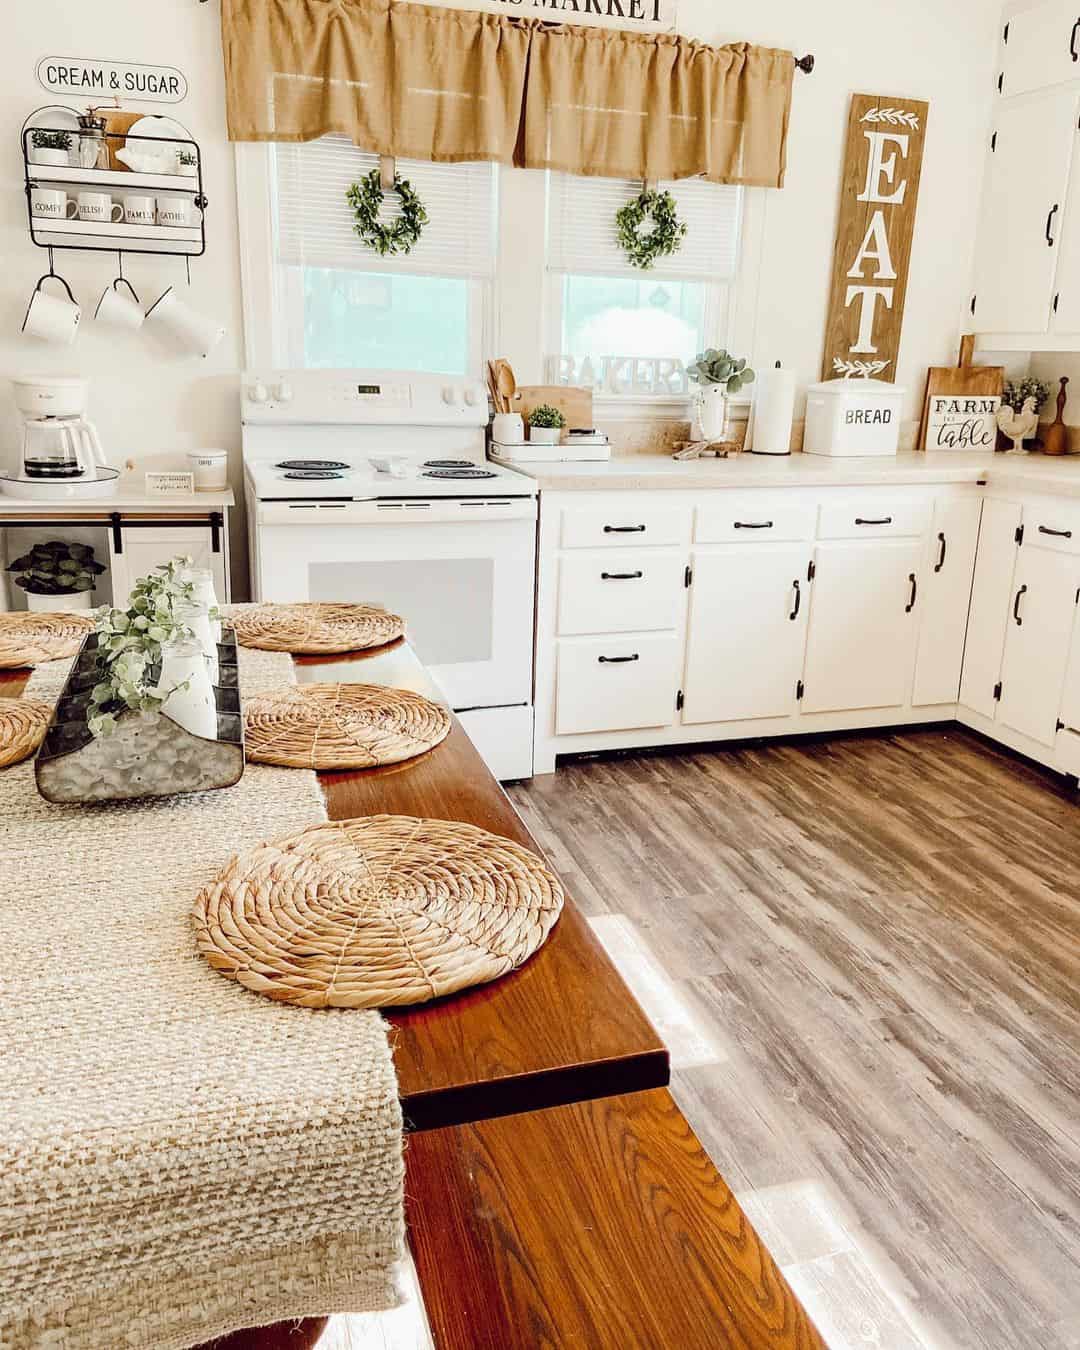 Vintage Charm in the Kitchen